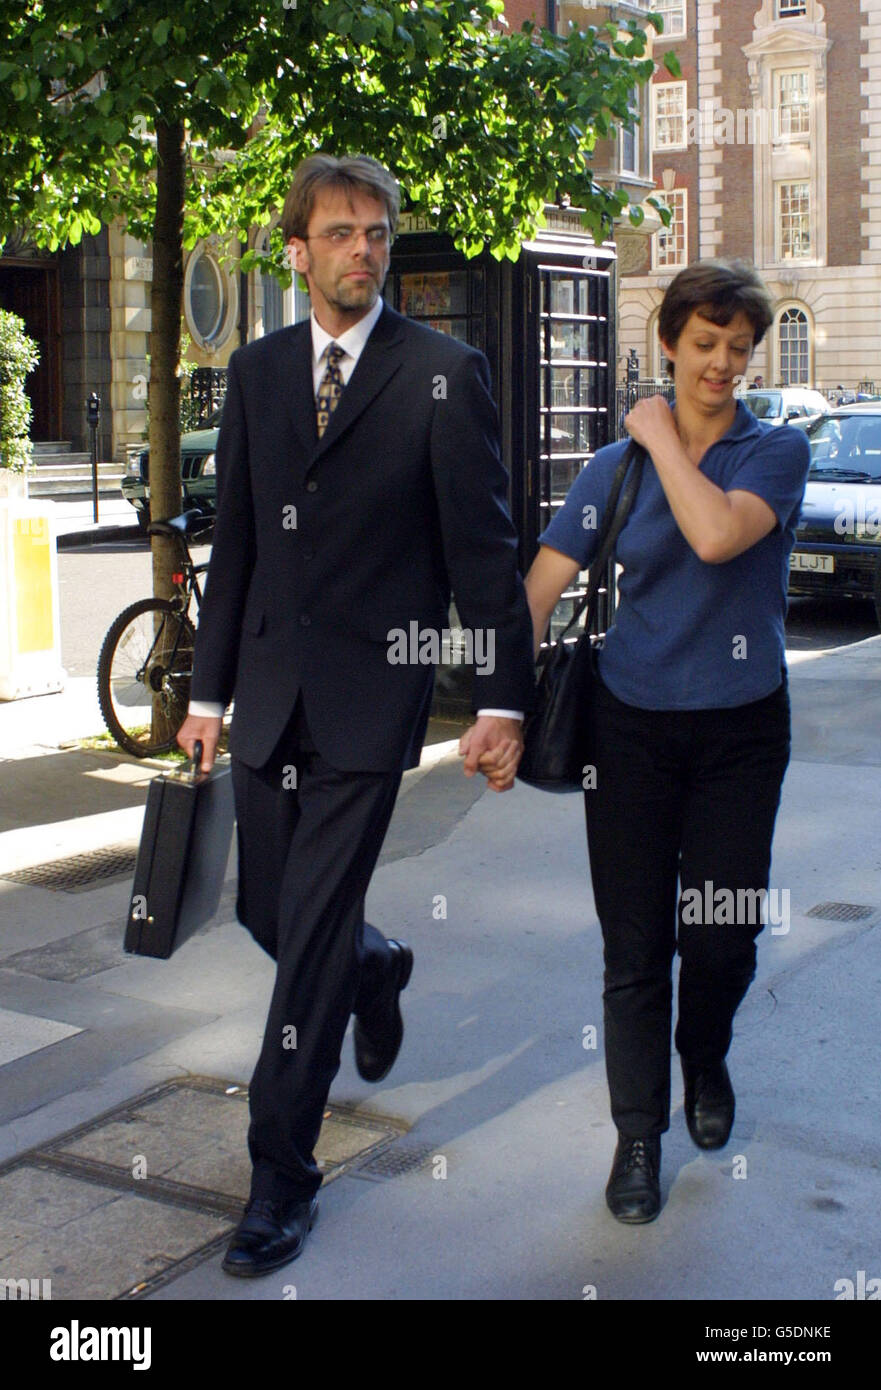 Peter Robson leaves the General Medical Council hearing in central London, with his wife (name unknown), following the hearing where he is accused of touching a woman inappropriately when she went to his surgery to obtain a death certificate. * ... just hours after her grandfather had died. Dr Robson, 36, is also alleged to have behaved inappropriately towards the woman, referred to as Miss B, on two house visits to treat another dying relative. Dr Robson denies all the allegations. Stock Photo